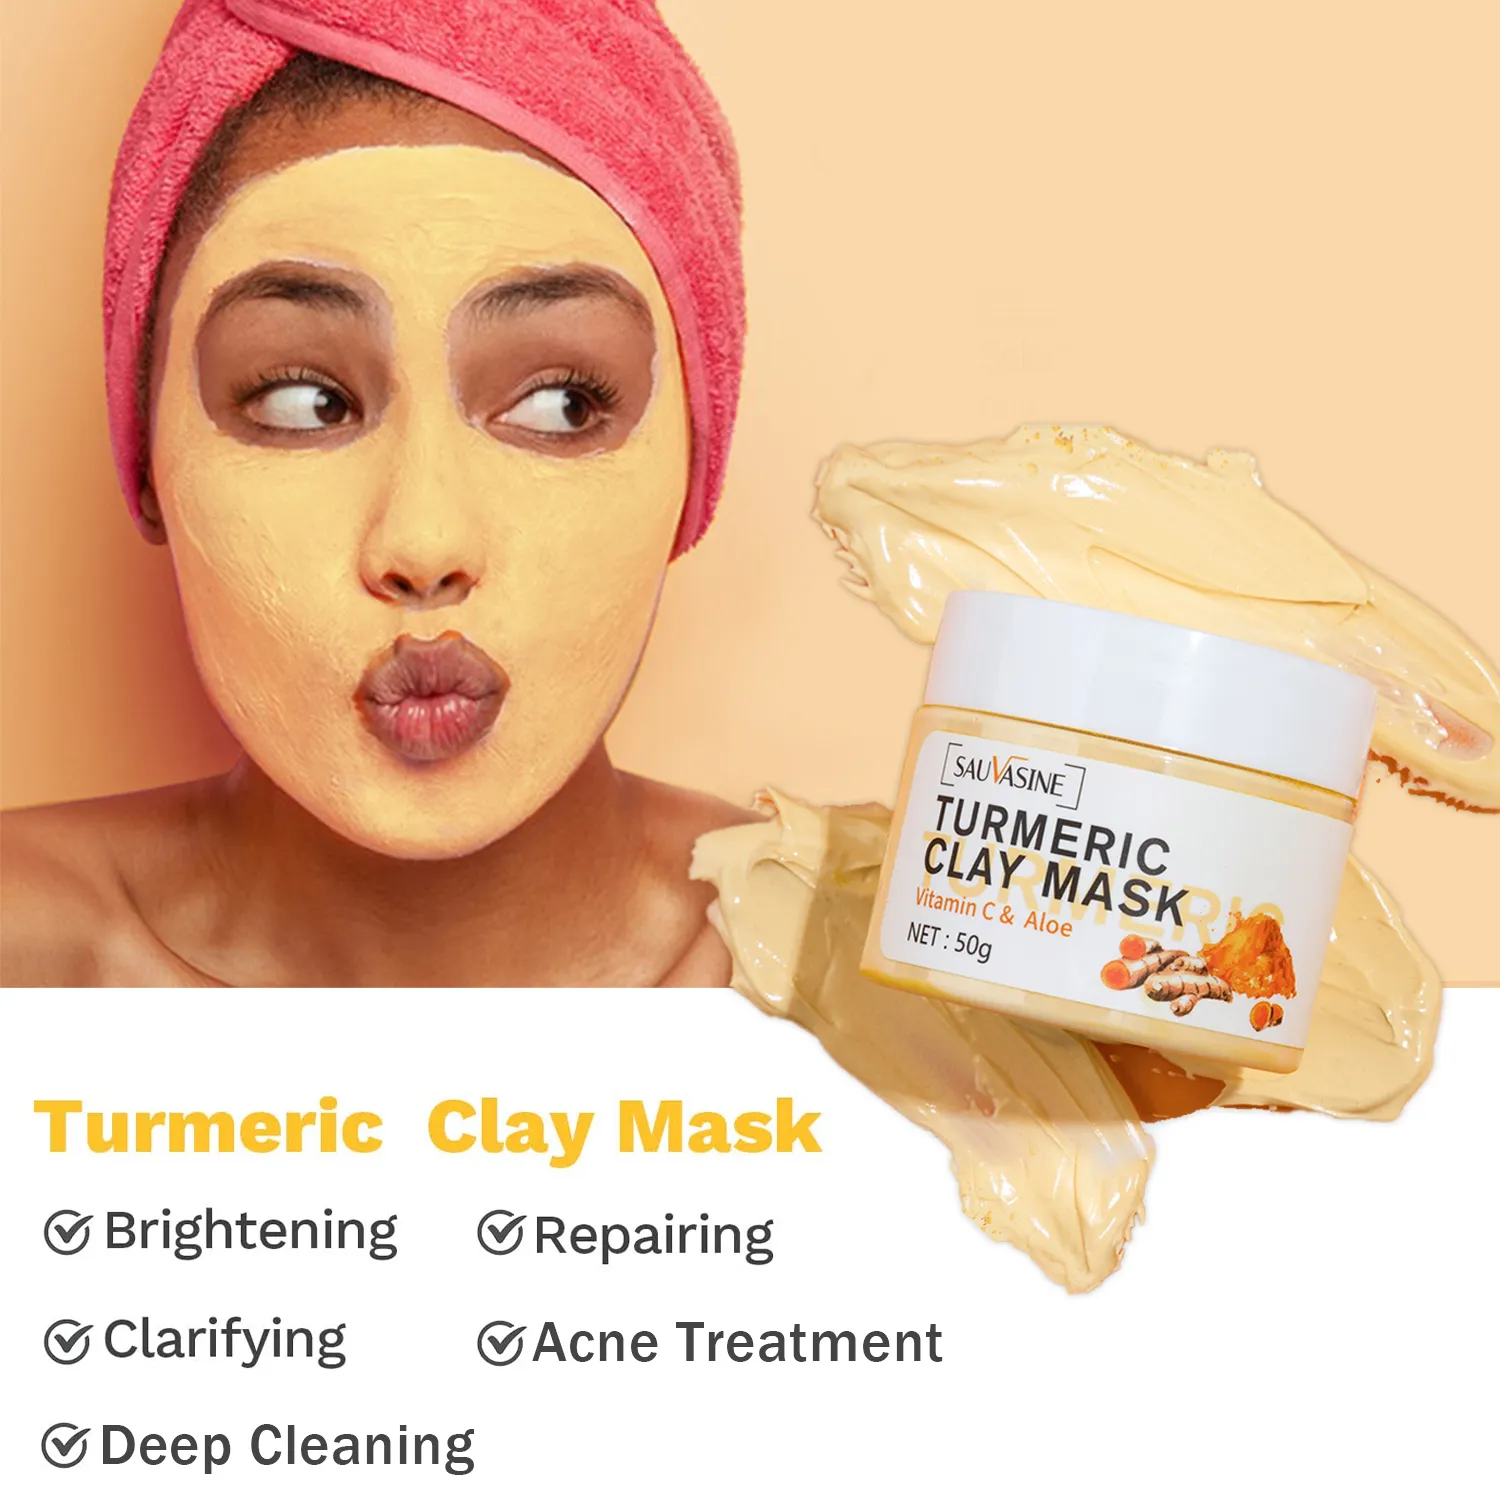 Professional Turmeric Mud Clay Face Mask Whitening Vitamin C Acne Treatment Dark Spots Remover Deep Cleaning Brightening Cream 4pcs professional diy stainless steel polymer clay tools filling and caulking kit tile grout floor pressure seam stick